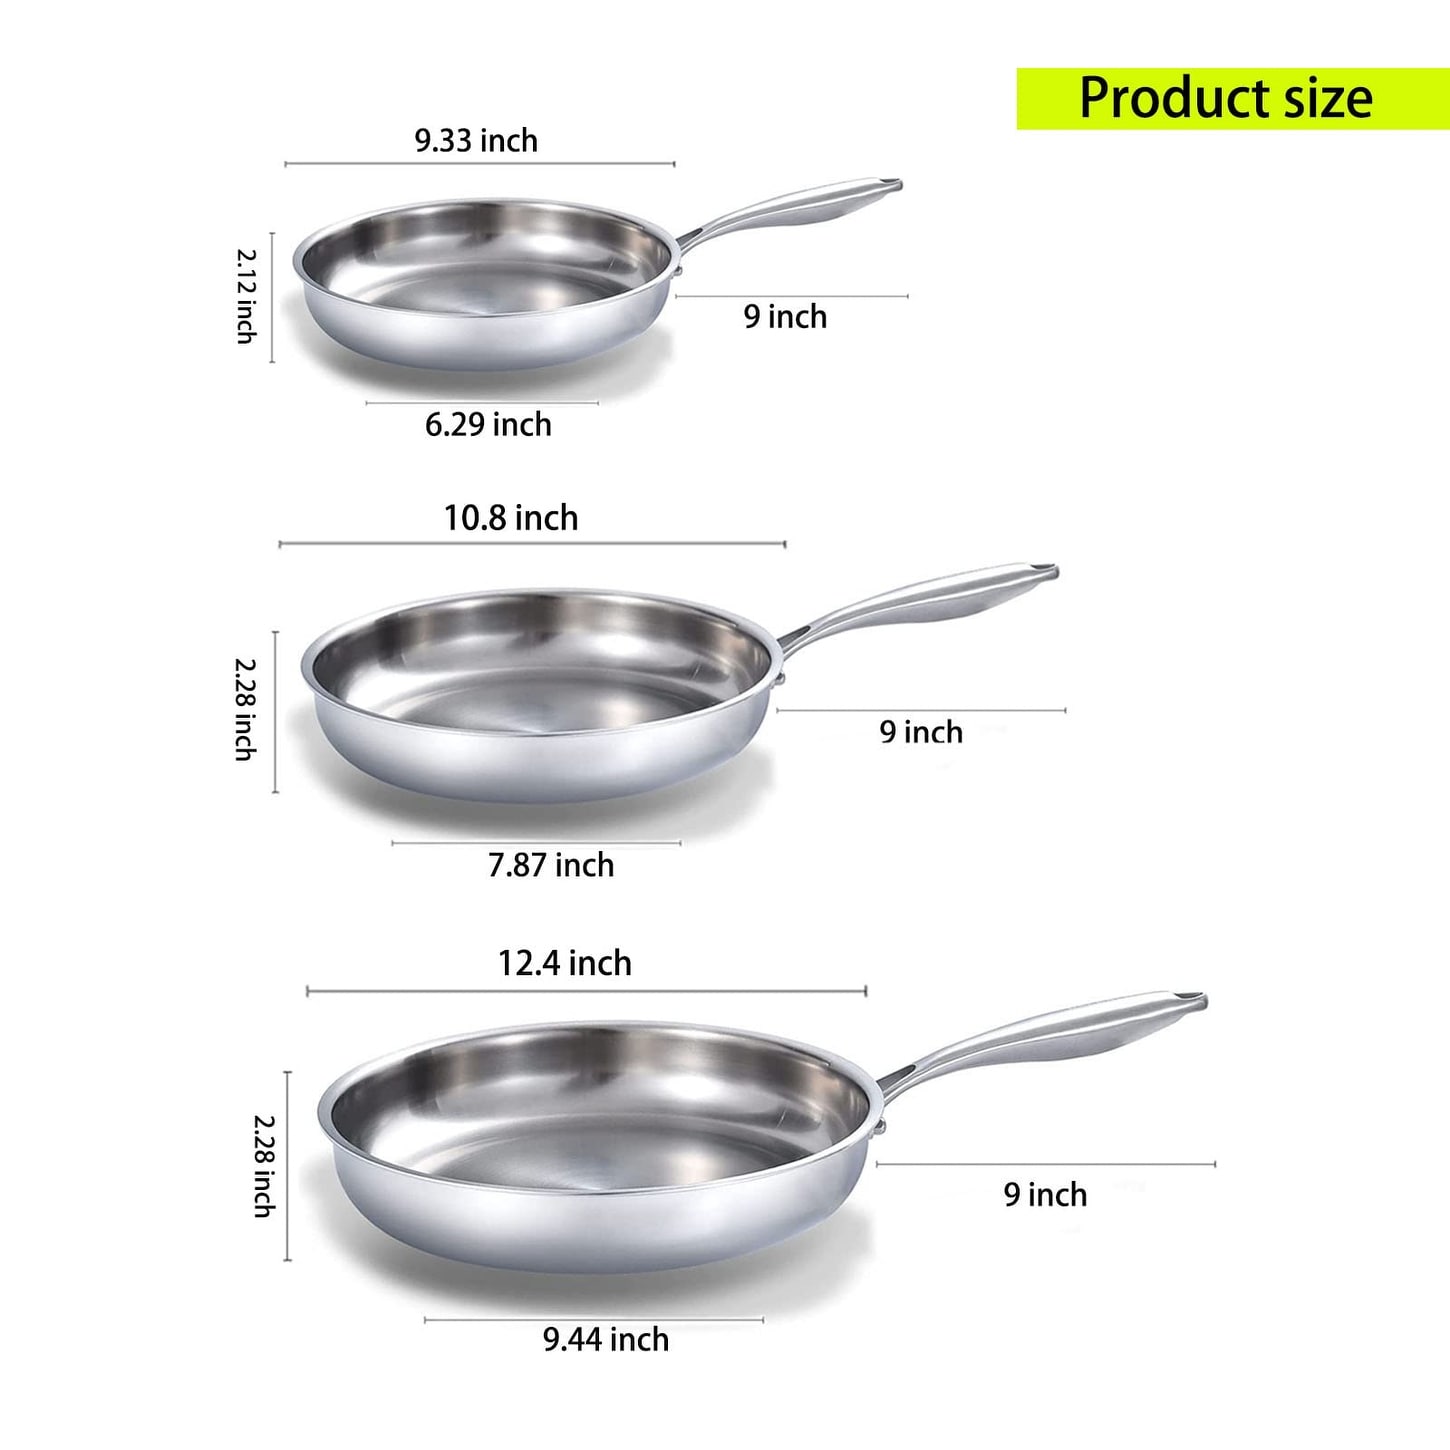 https://ak1.ostkcdn.com/images/products/is/images/direct/c43d8cf28c1d4973d2ee40c33533aa549b472328/Stainless-Steel-Frying-Pan-Set%2C-8%22-10%22-12%22-Cooking-Pans%2C-Kitchen-Cookware-Set%2C-Chef%27s-Pan-with-Handles.jpg